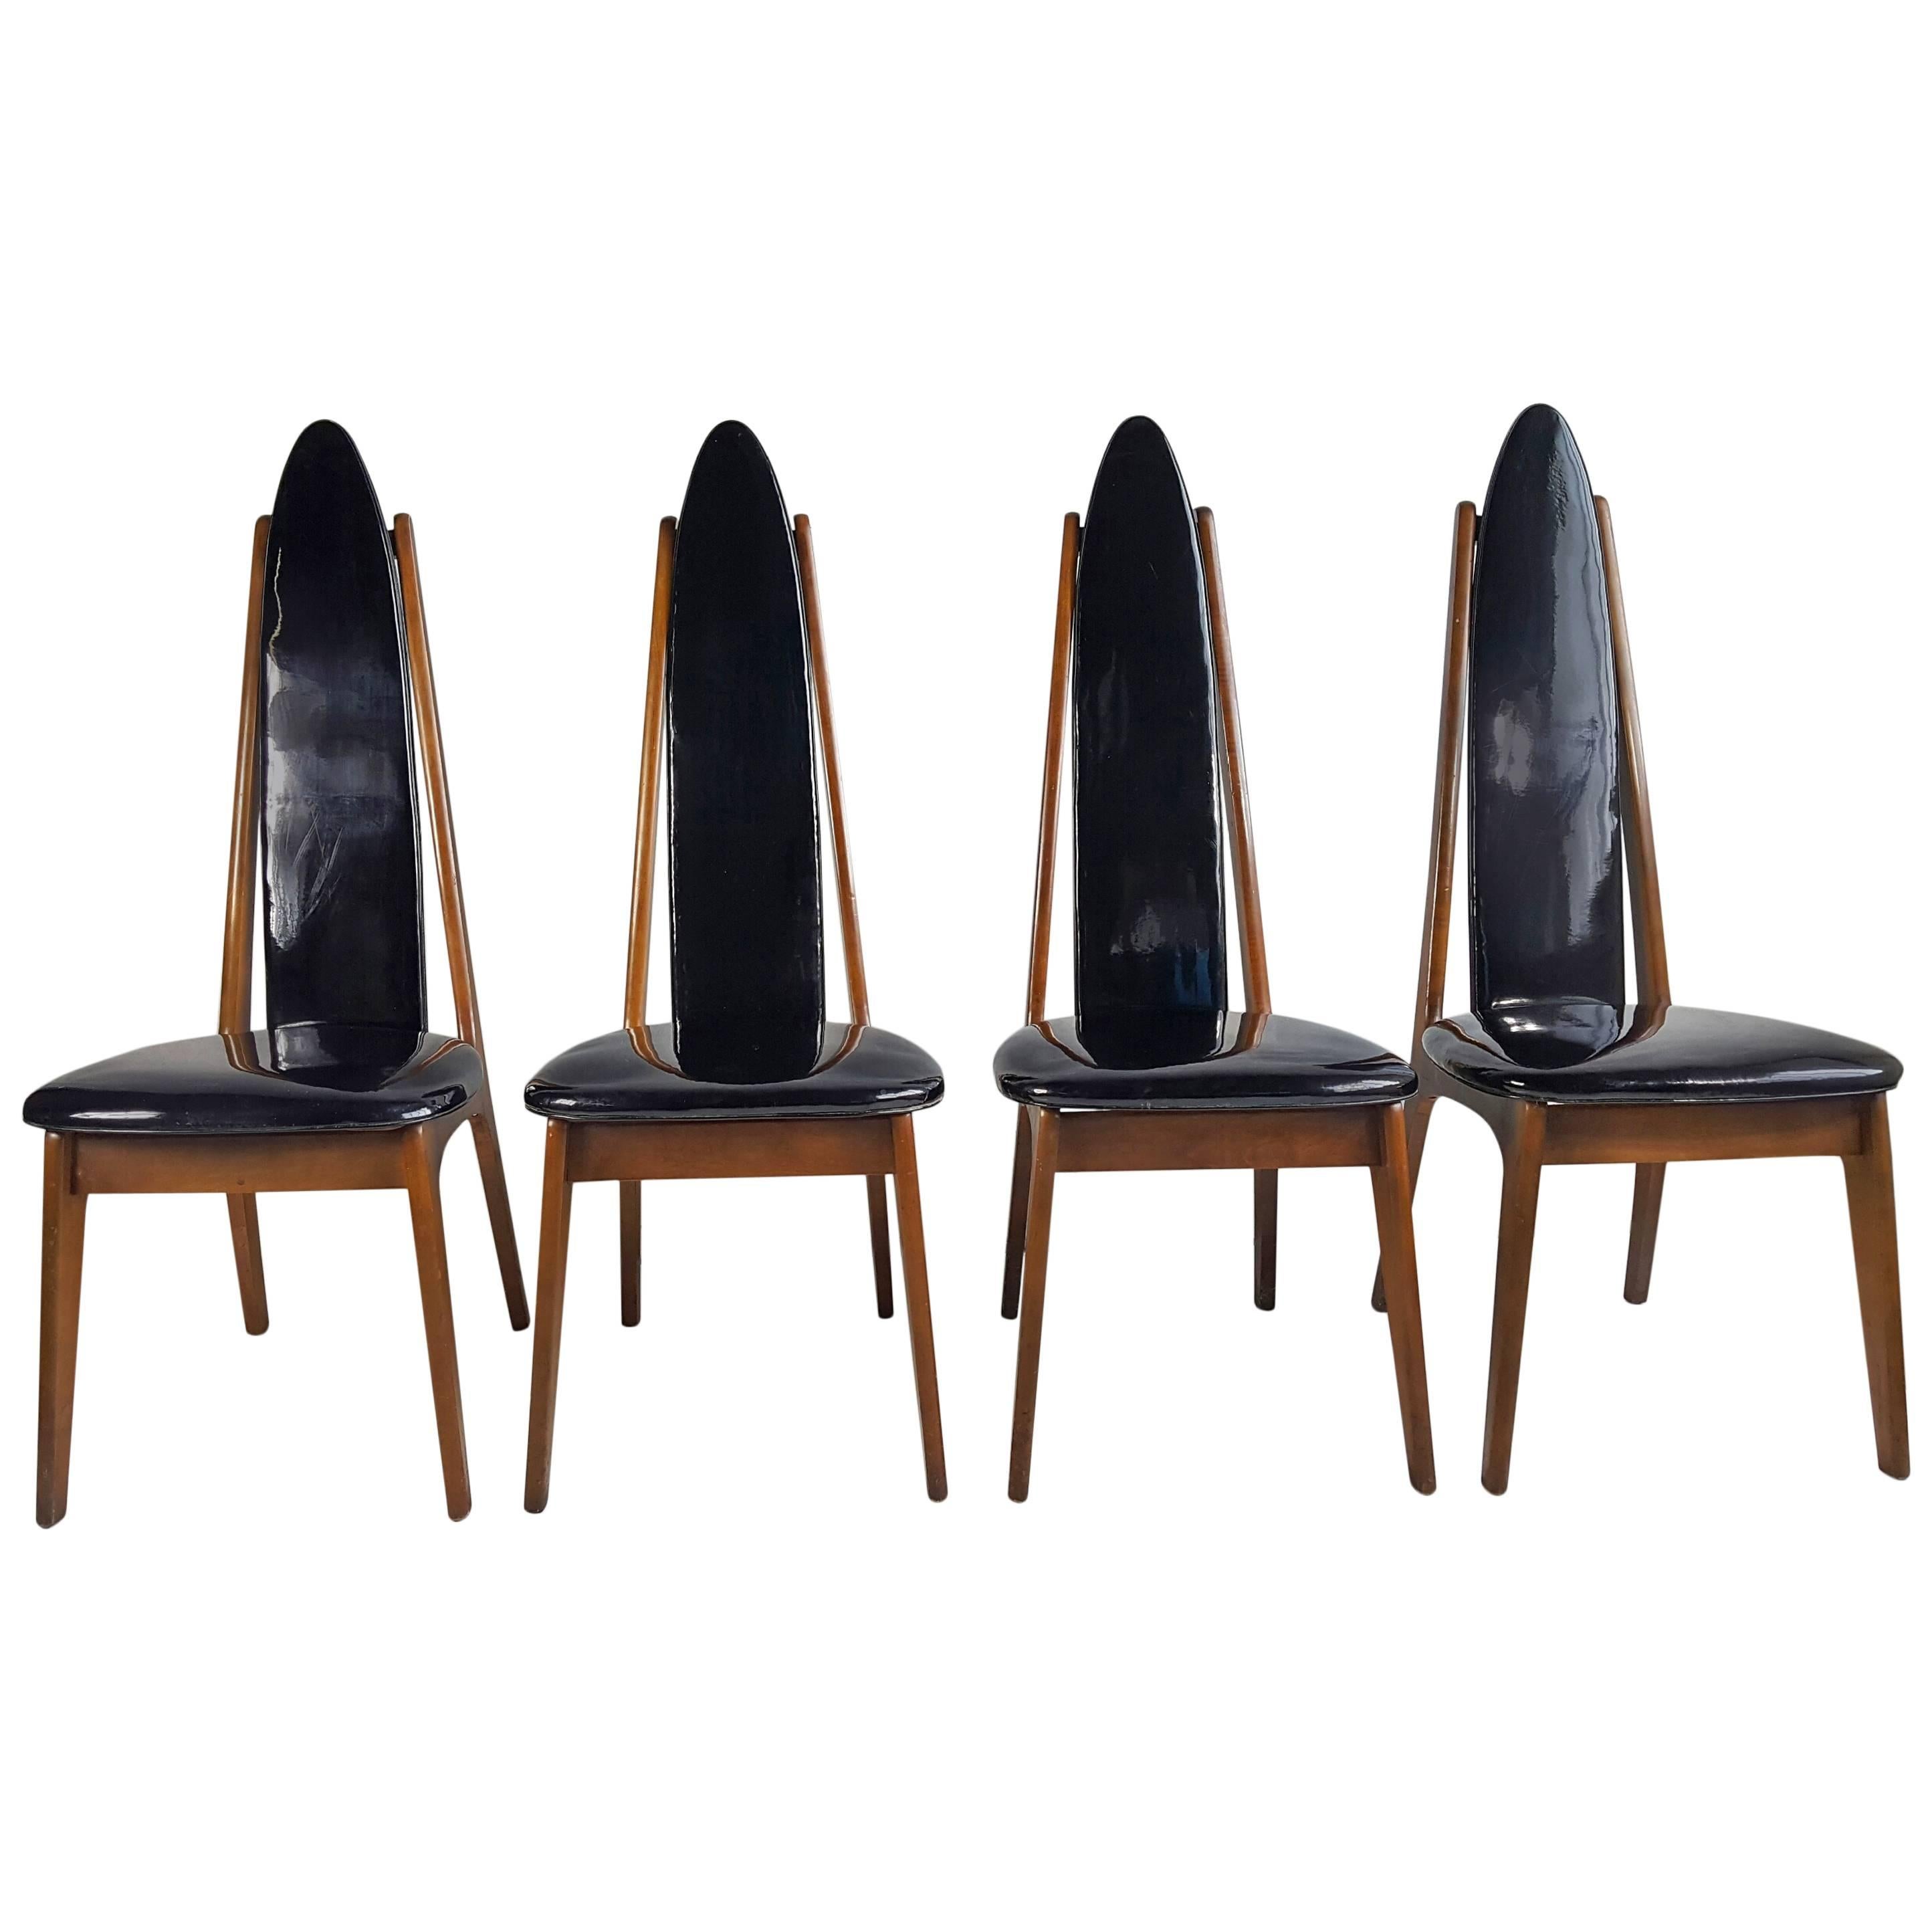 Set of Four Black Patent Leather Modernist Regency Dining Chairs